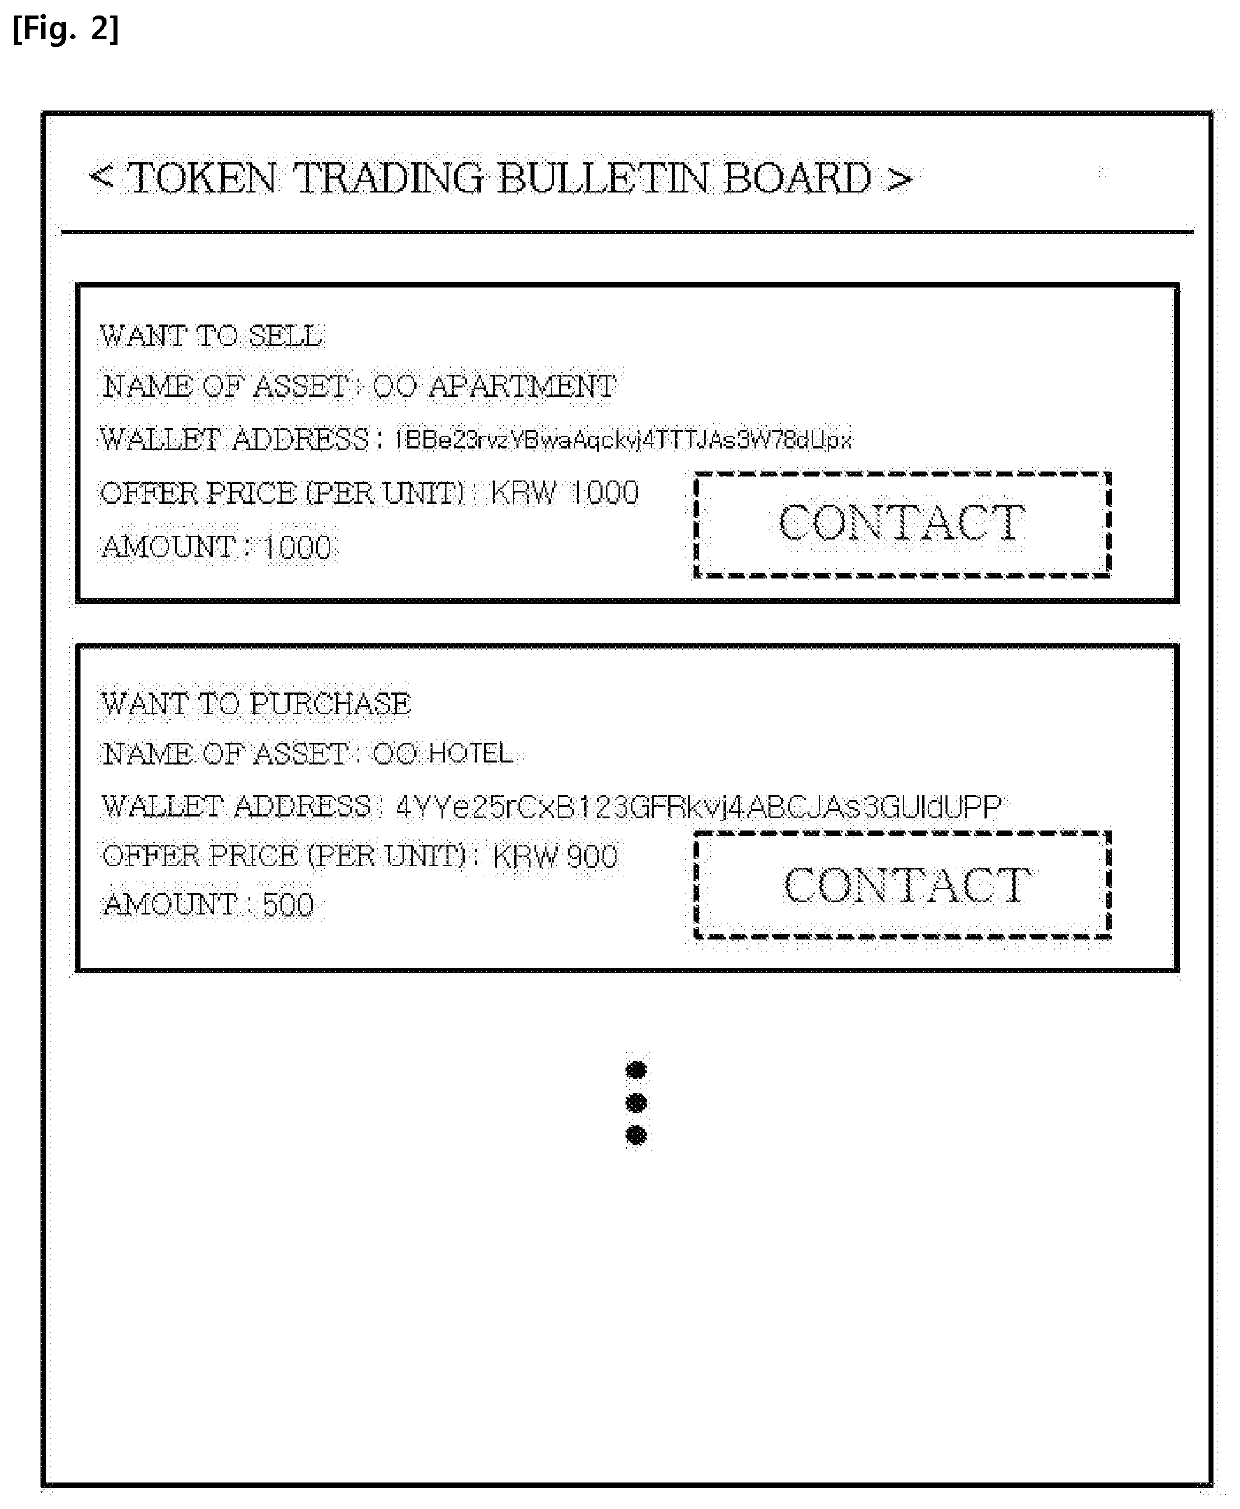 System and method for trading assets among parties through tokenization of assets